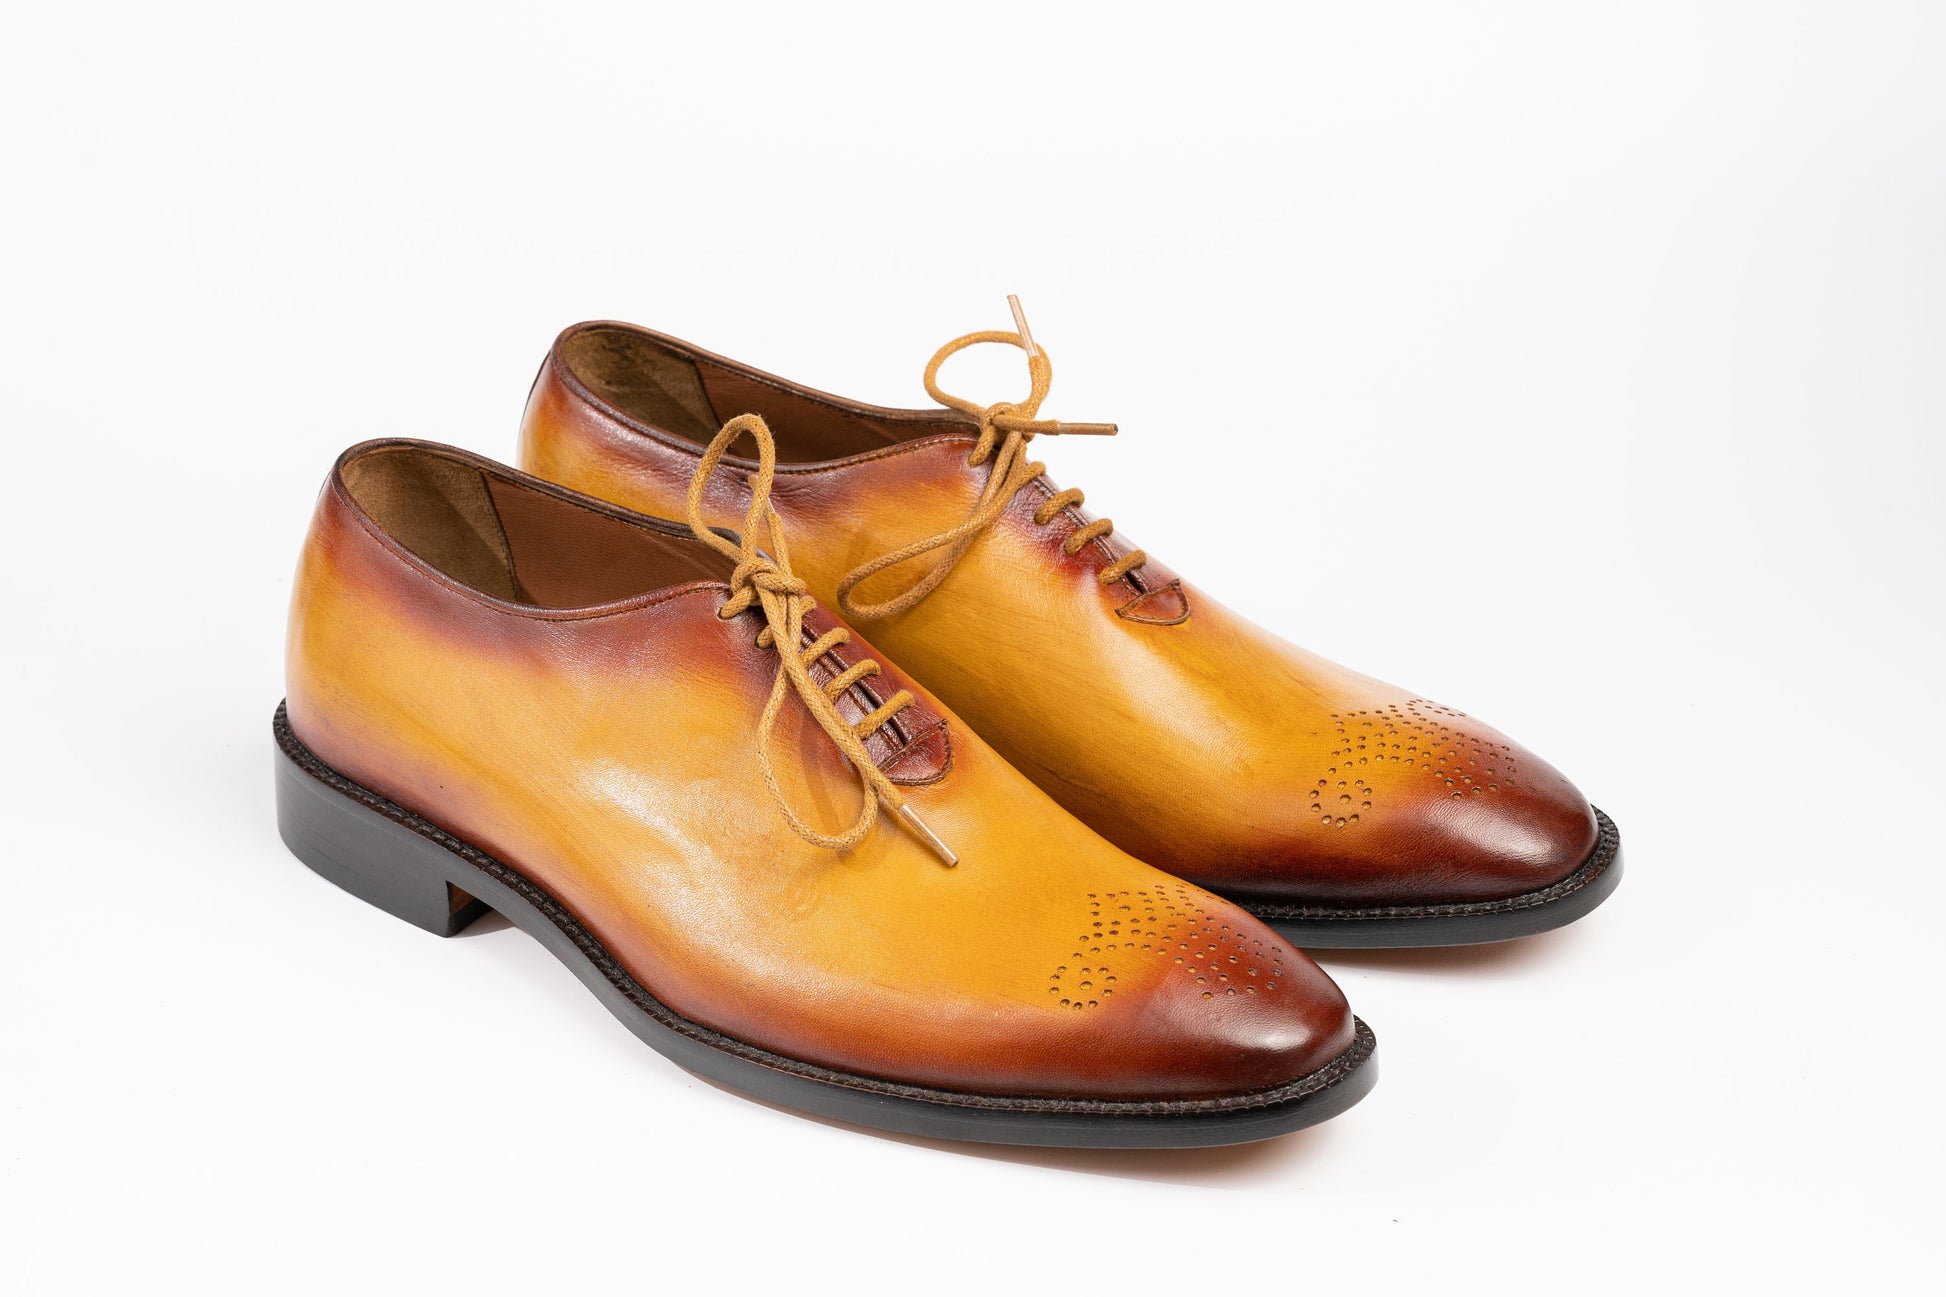 Handmade Tan Whole Cut Oxfords - Vegetable Tan Leather, Hand-Dyed Patina Finish, 1" Stacked Heel, Goat Leather Lining Luxury Made To Order Woozy Store